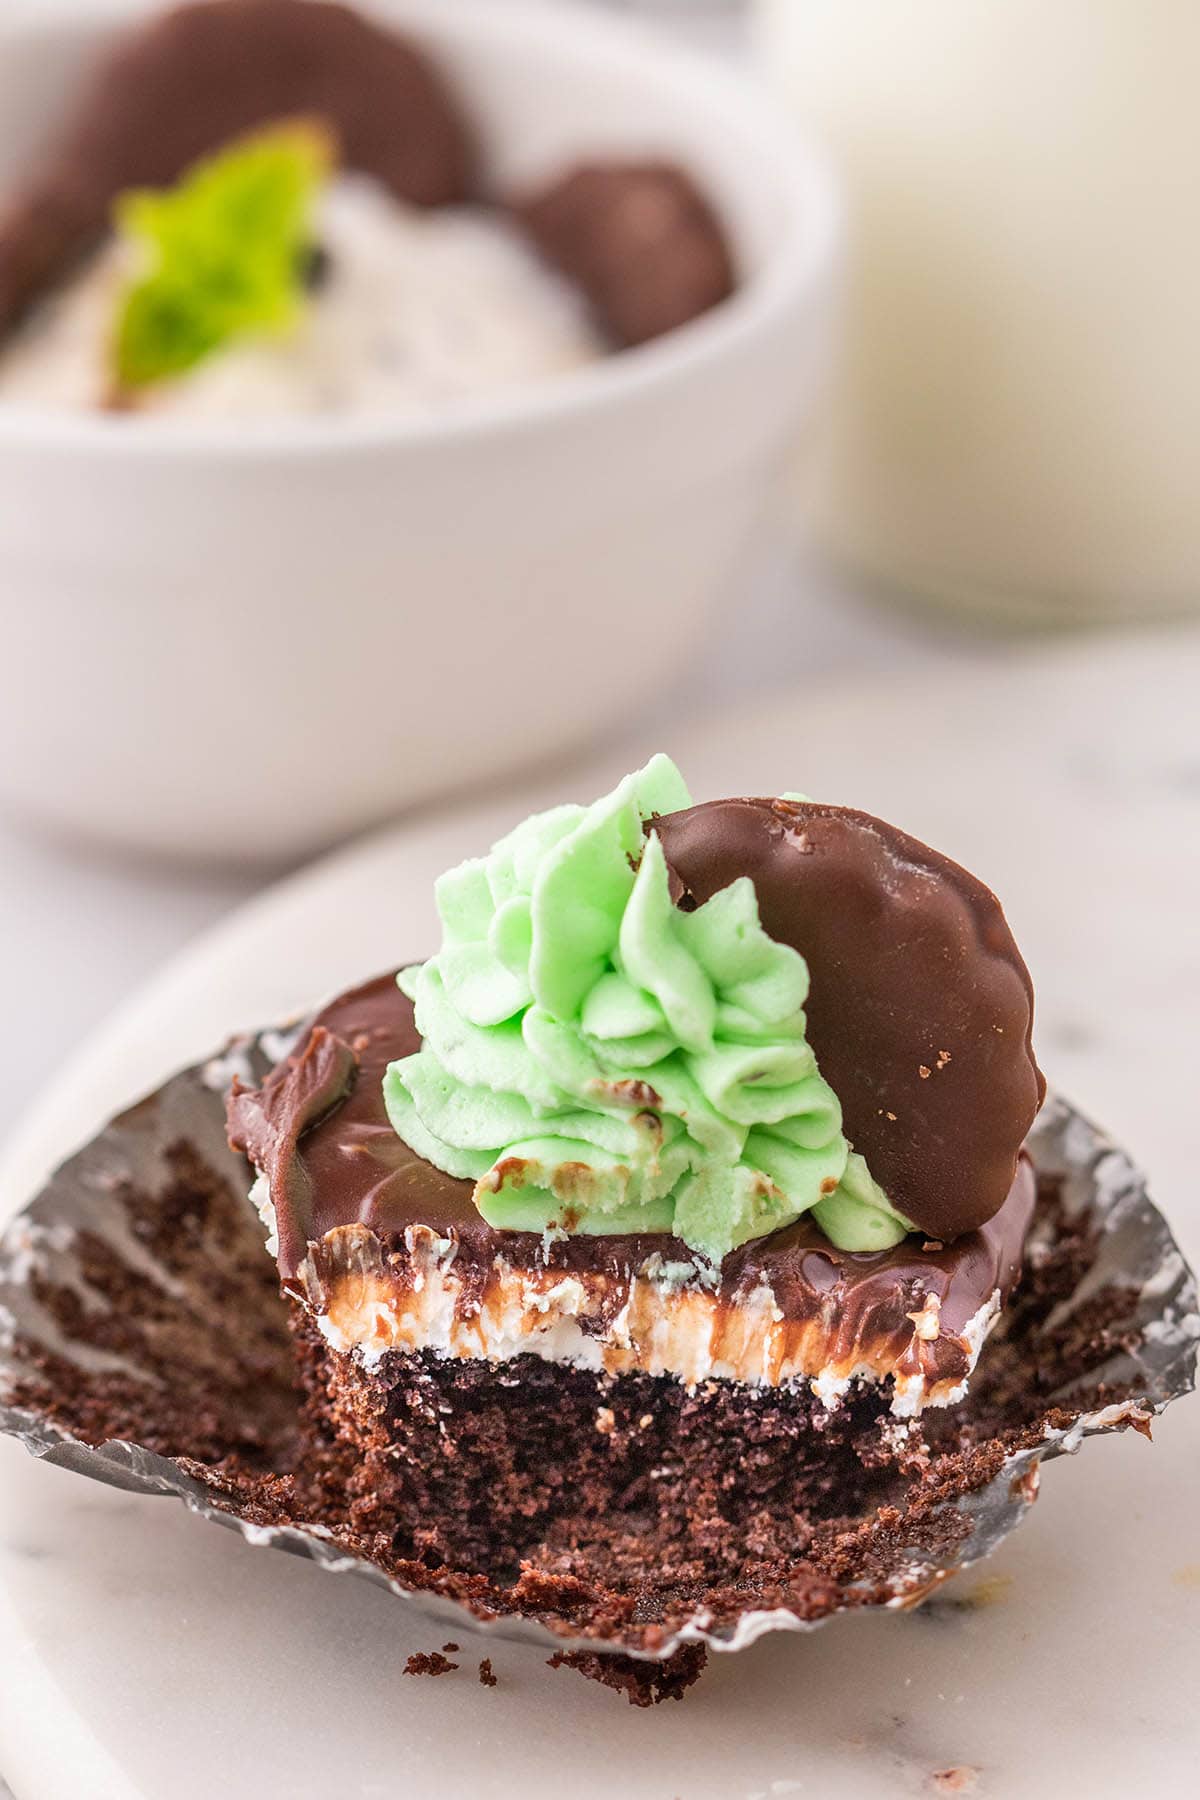 bitten Thin Mint Cupcakes and a white bowl on the background.